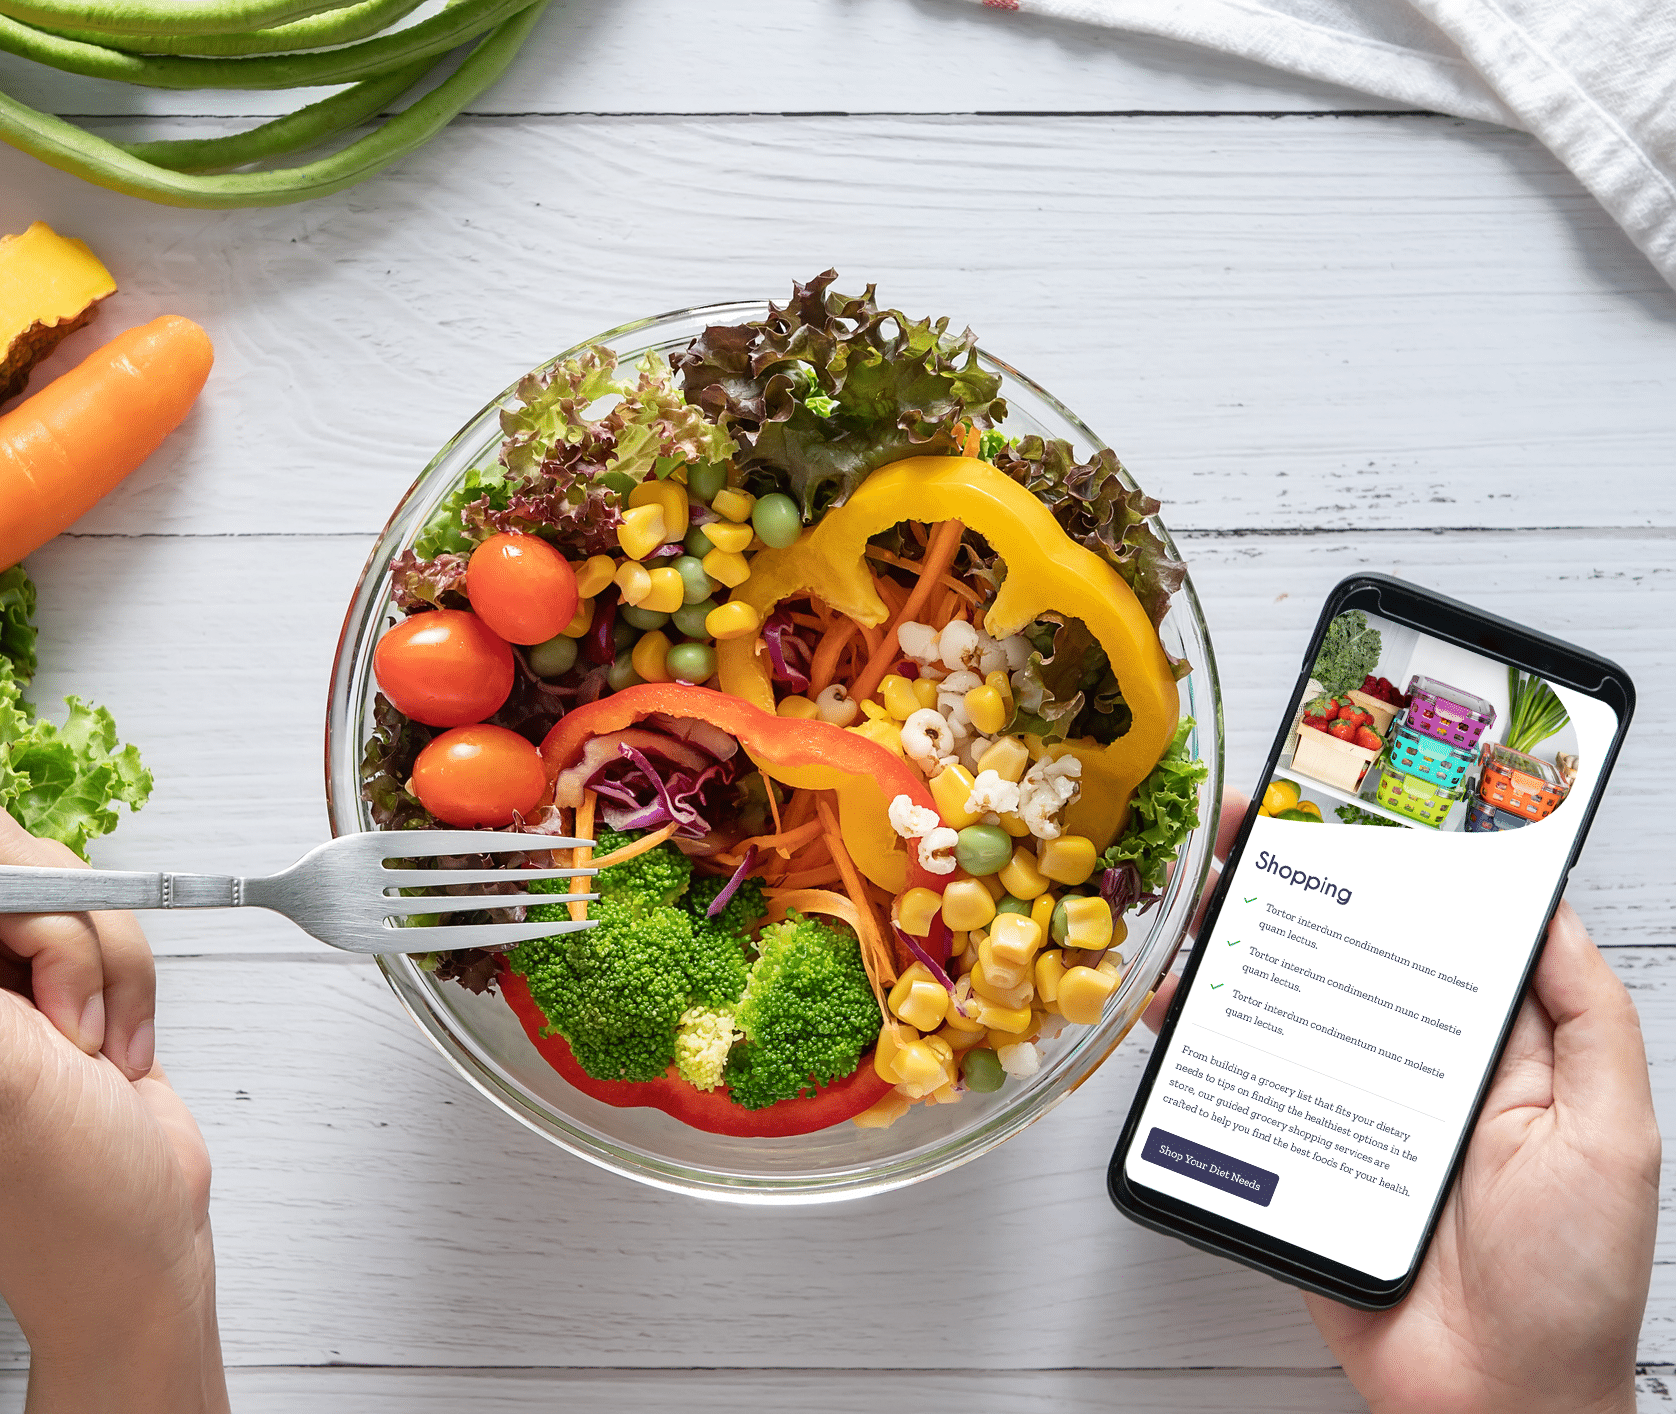 A bowl with ingredients for a salad made with corn and other vegetables with a hand holding a phone with the Dietitian Group shopping page visible.